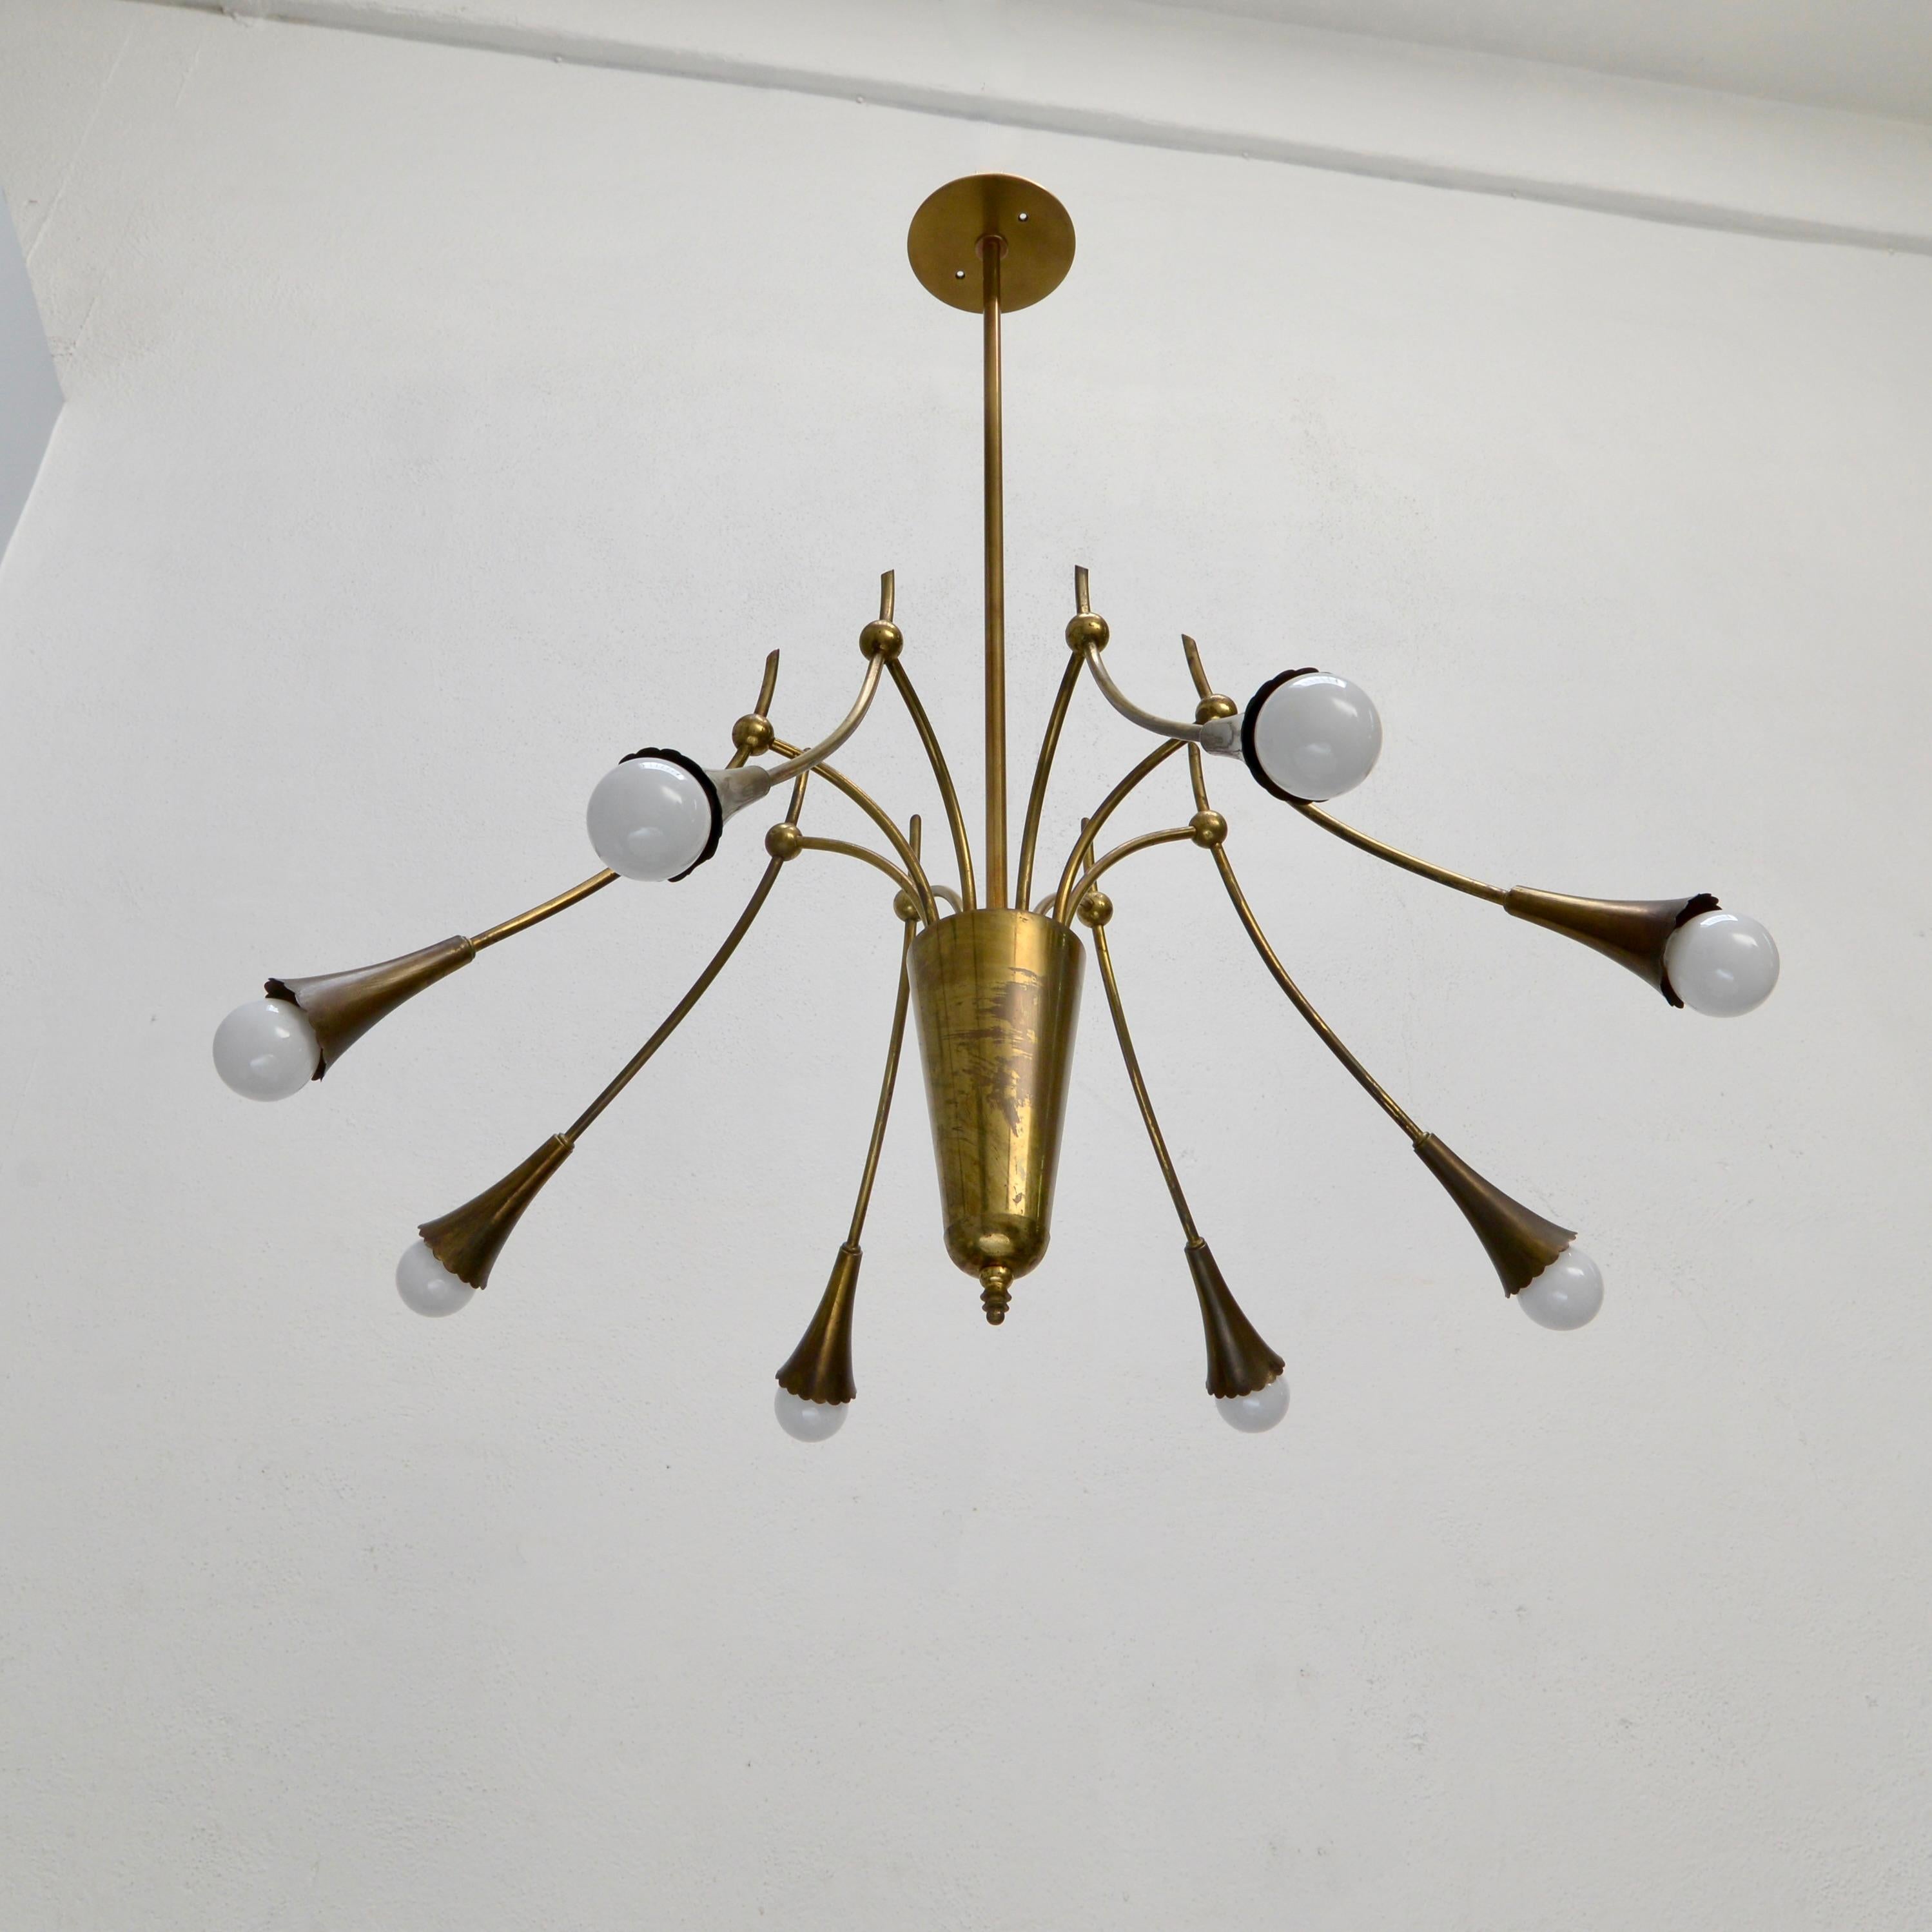 Of the period mid century Italian 8 shade 1950s Botanical chandelier. Fabricated in naturally aged brass of many years. Wired with 8-E12 candelabra based sockets. Wired for use in the US. Light bulbs included with order.
Measurements:
OAD: 34”